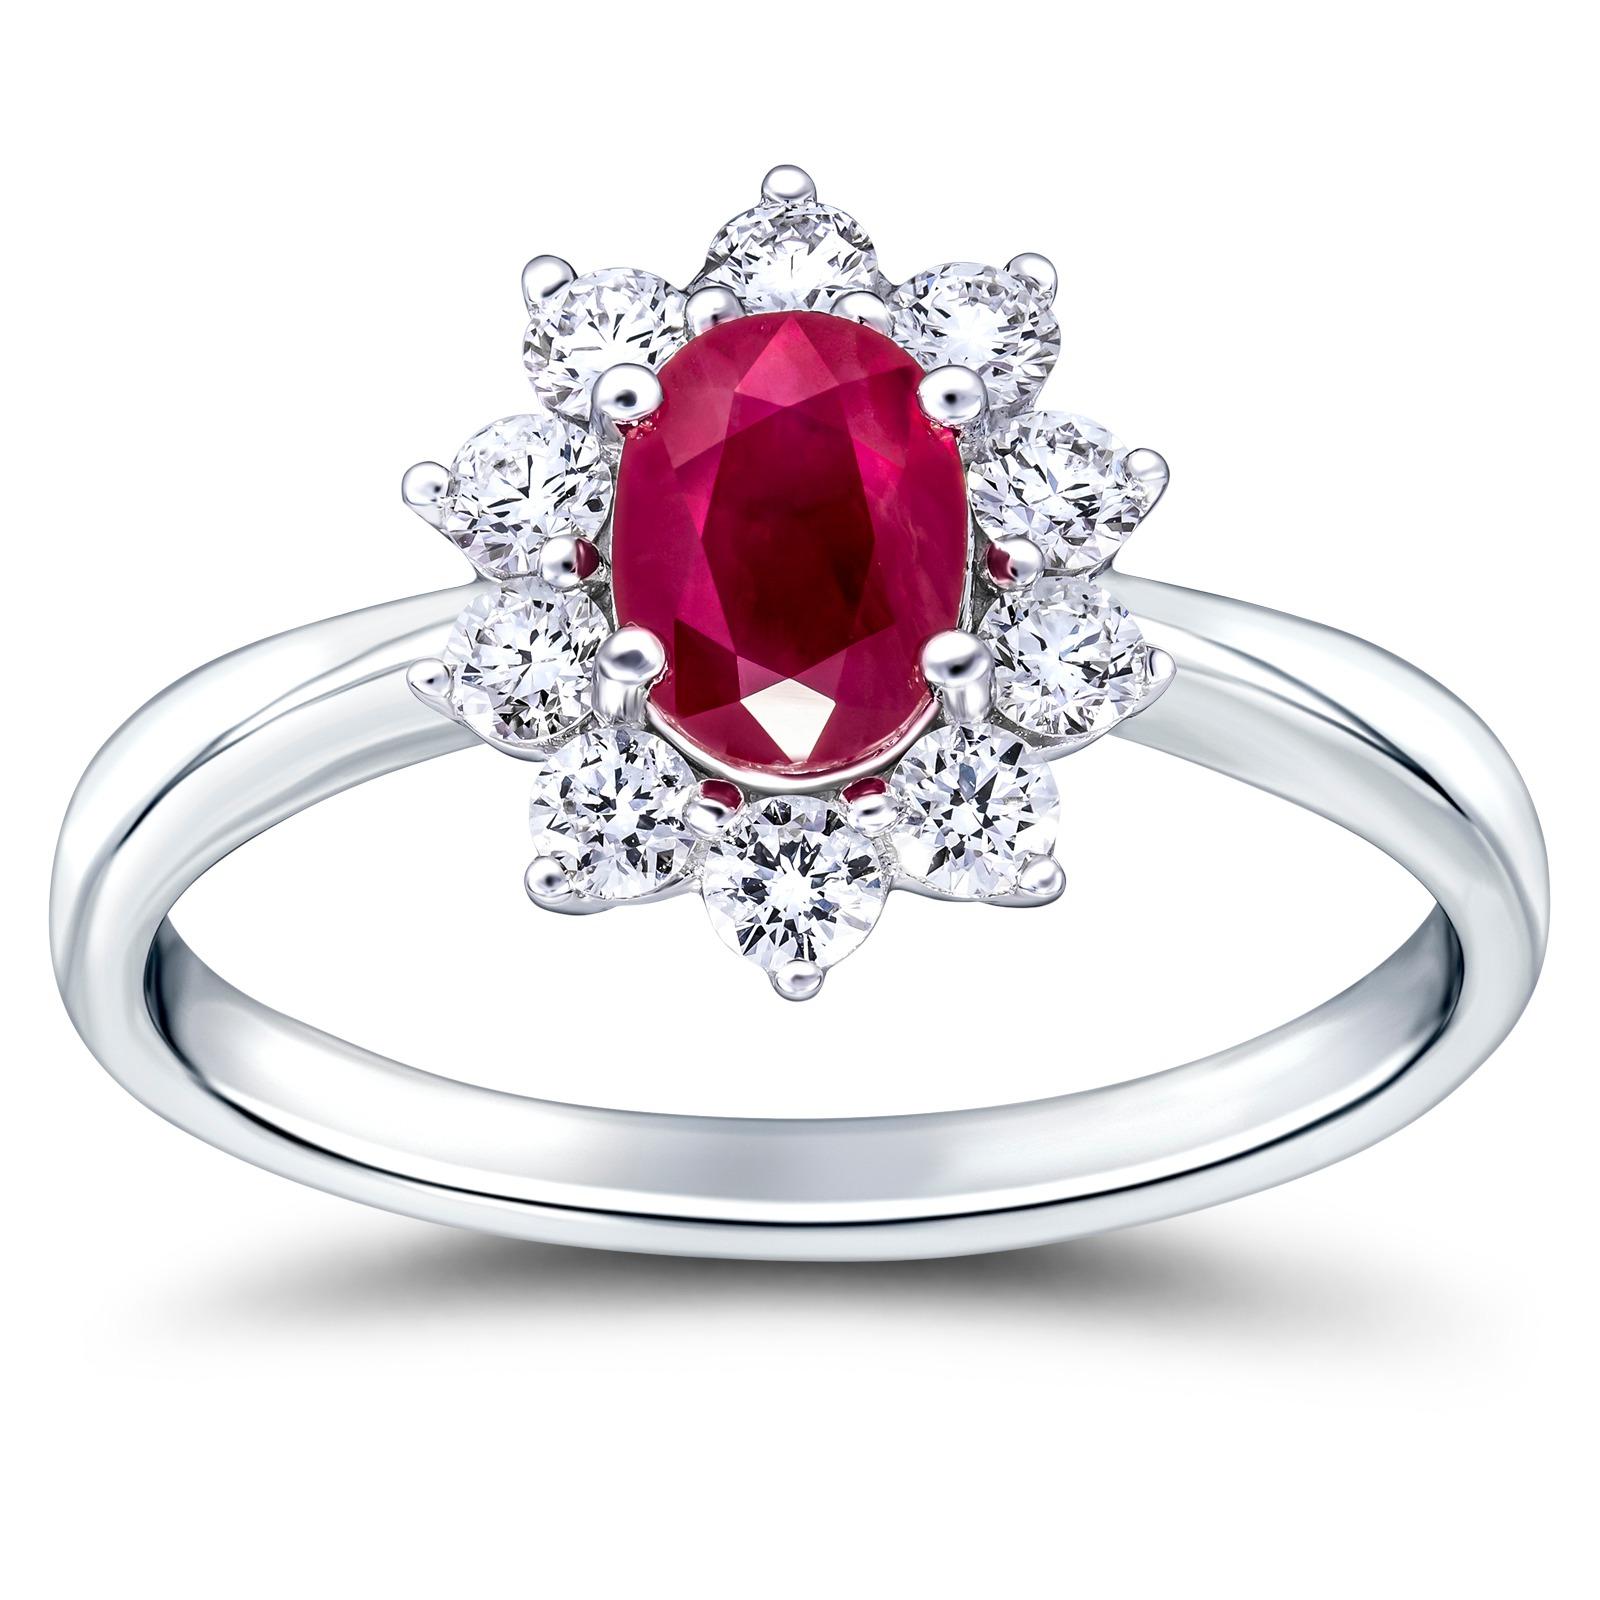 Elegant and striking 0.80 Carat total diamond and ruby Cluster Ring, The radiant oval ruby is surrounded by 10 white stunning white diamonds weighing a total of 0.30 carat color G/H clarity SI, the ruby is 0.50 carat in weight 6x4 mm. The ring is